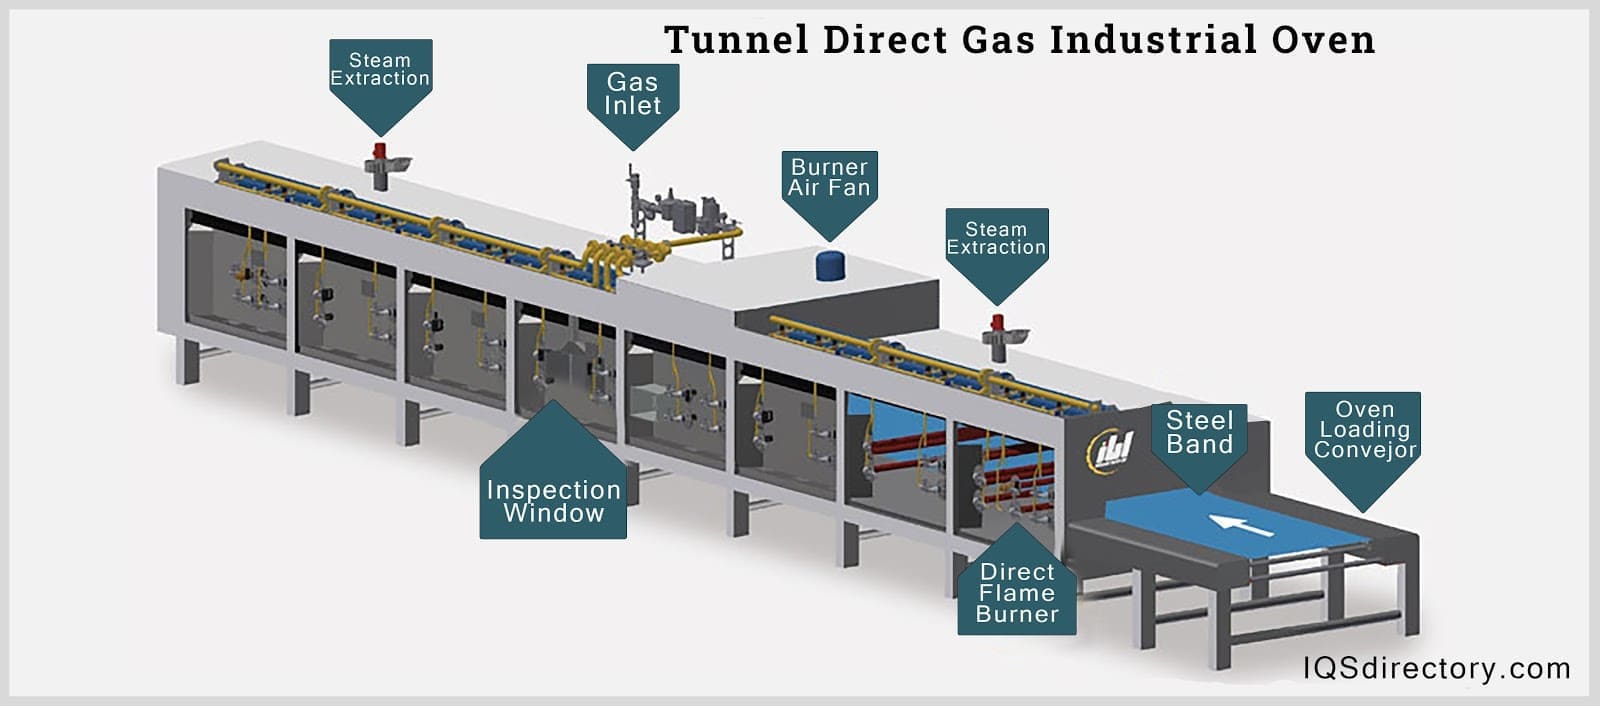 Tunnel Direct Gas Industrial Oven